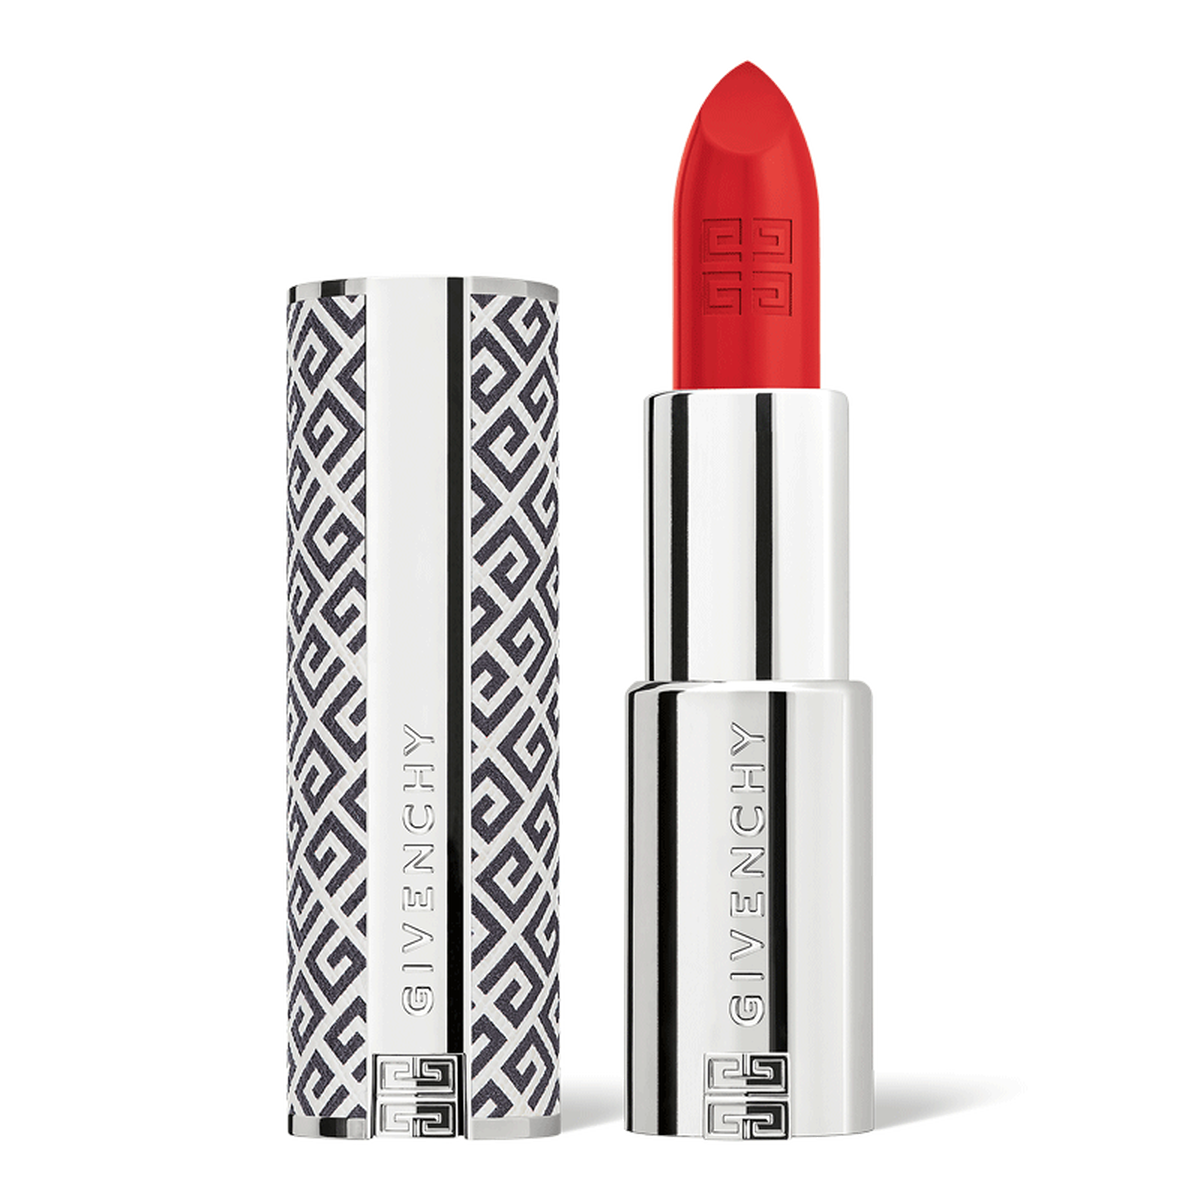 Givenchy, 2019 Lunar New Year Edition Prisme Libre & Le Rouge Lipstick:  Review and Swatches